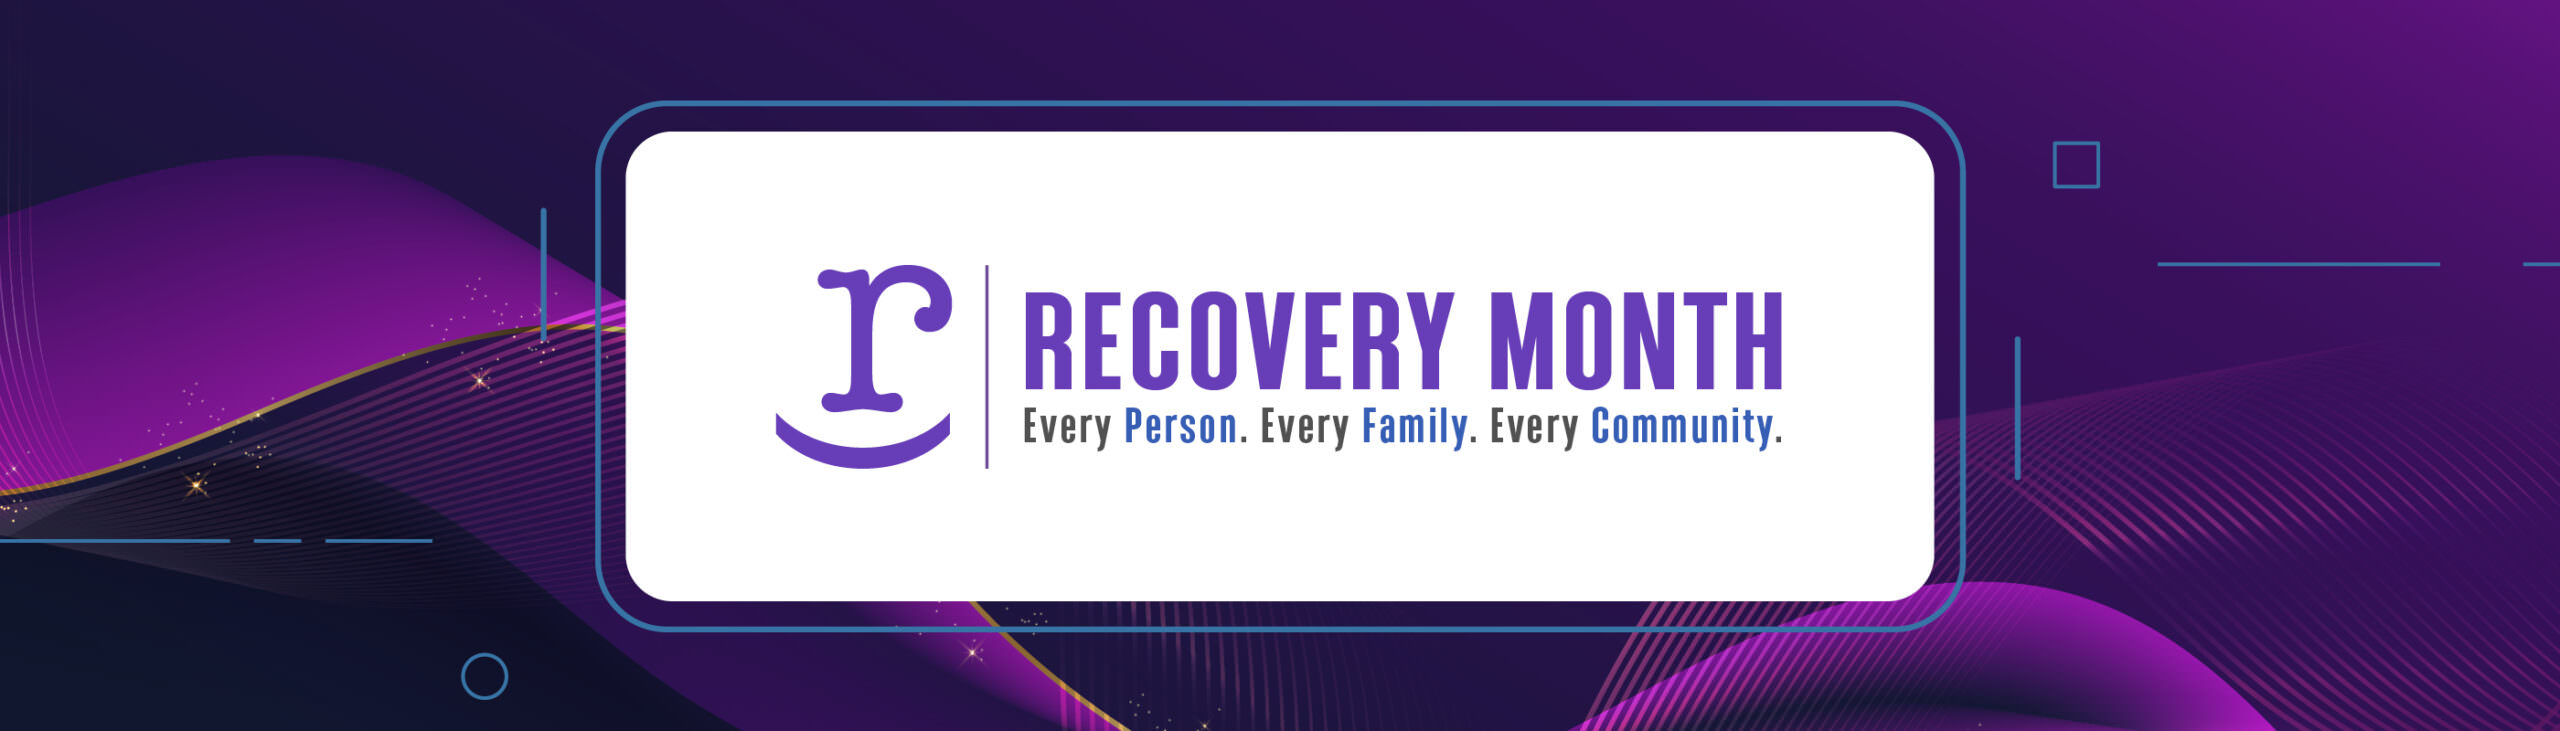 Recovery Month featured image for events calendar